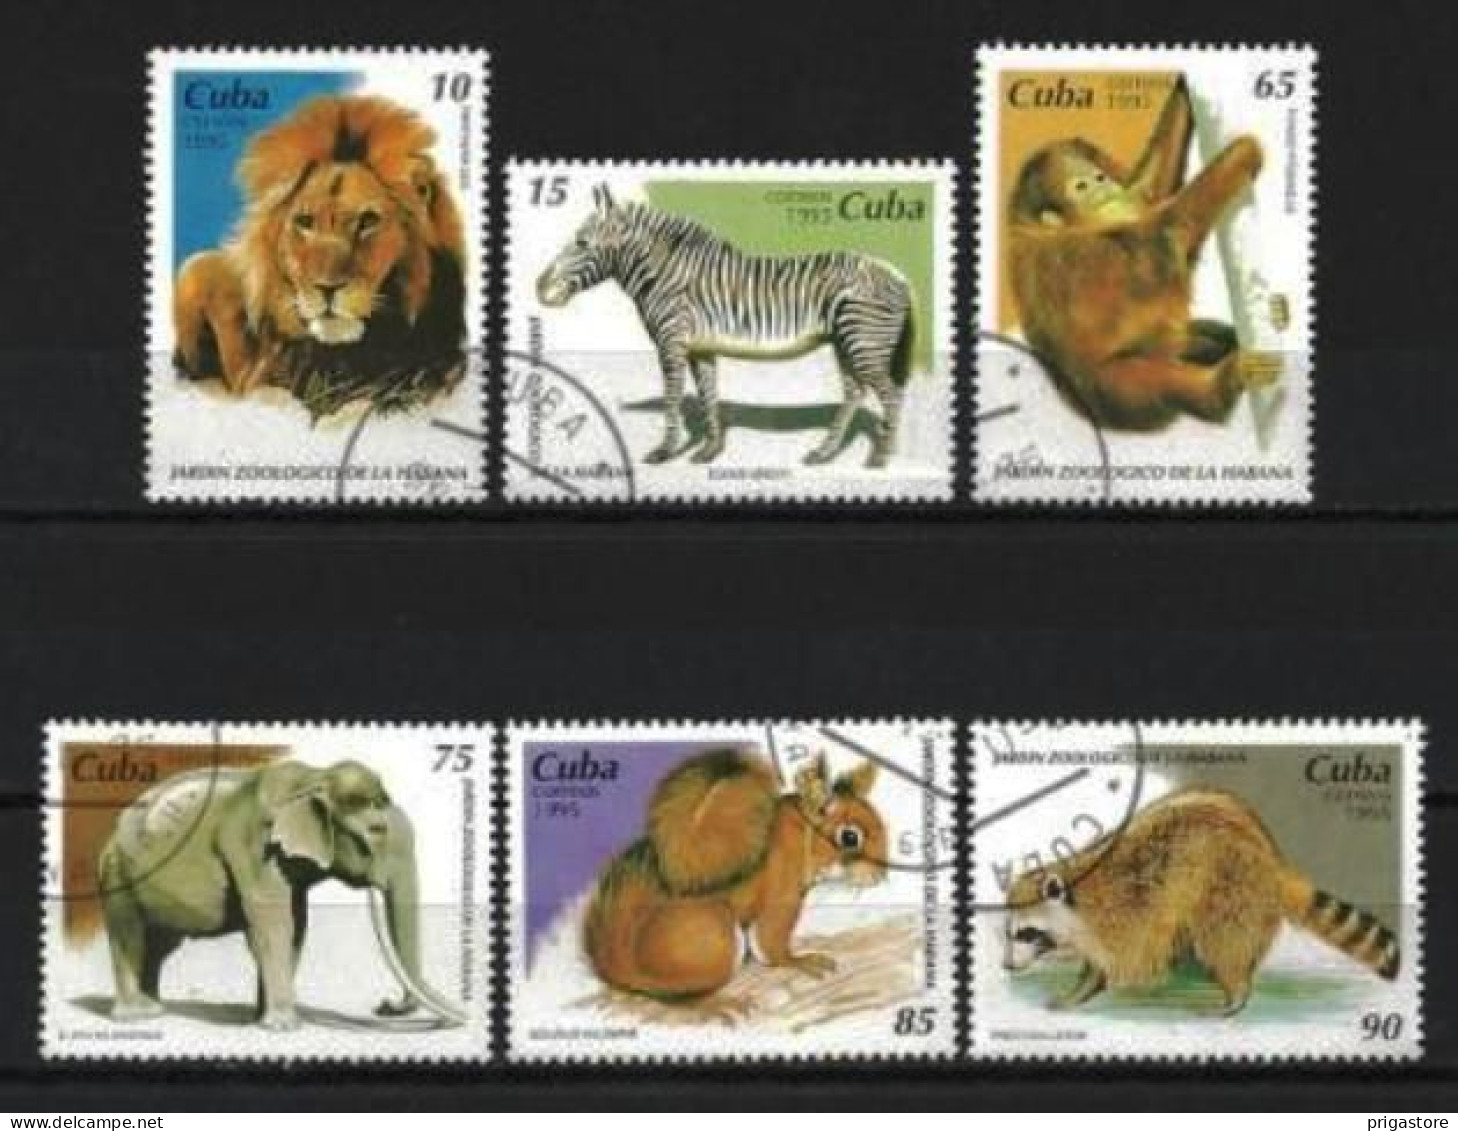 Cuba 1995 Animaux Sauvages (20) Yvert N° 3498 à 3503 Oblitéré Used - Used Stamps